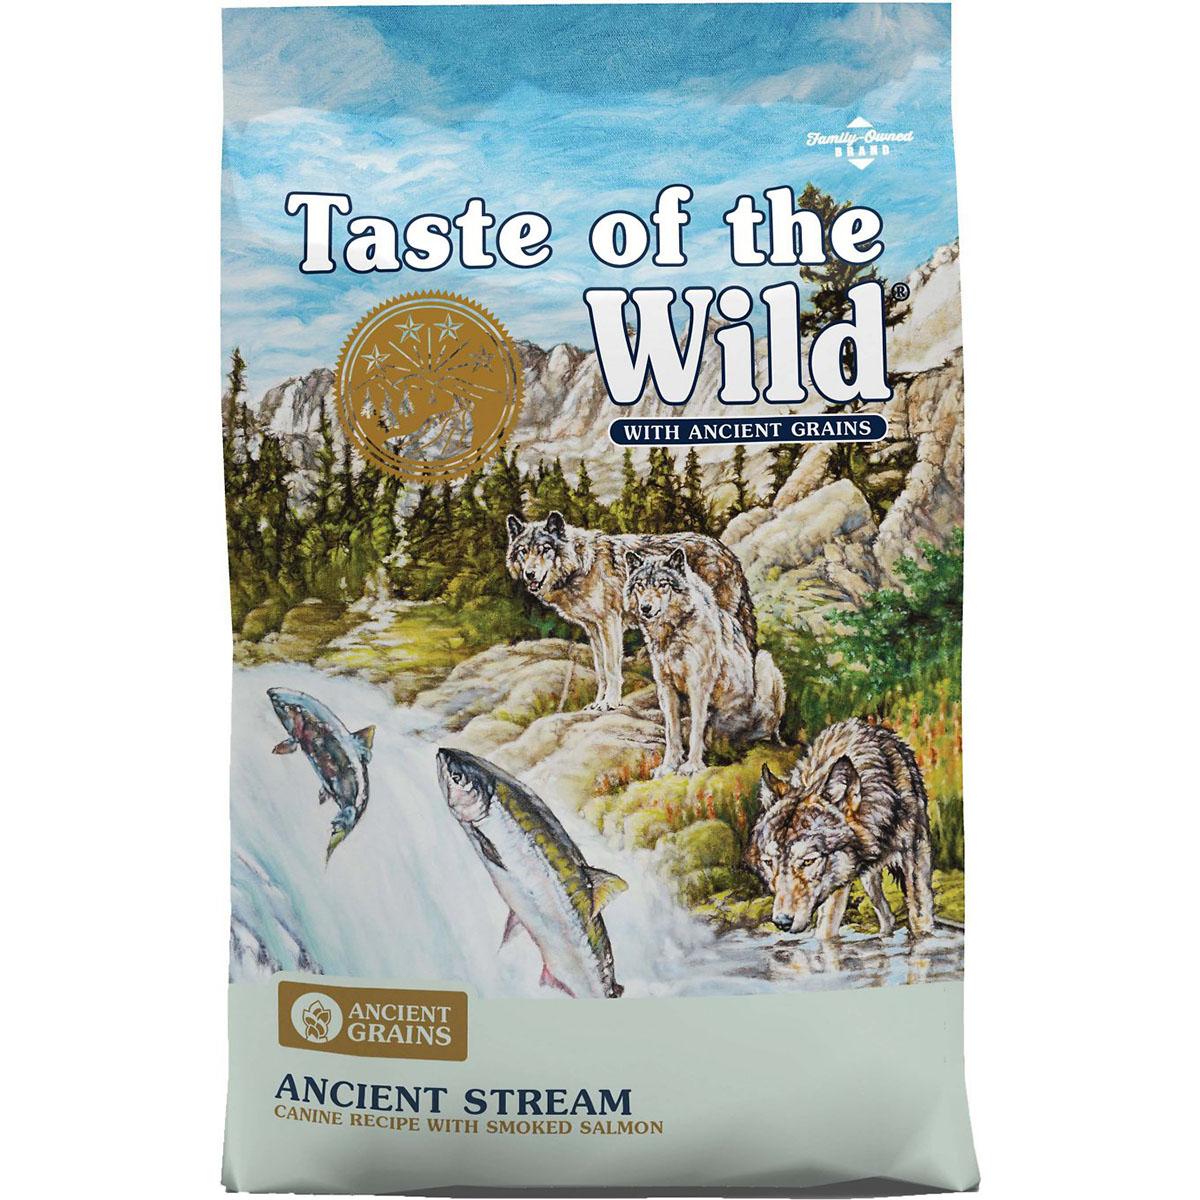 Taste of the Wild Ancient Stream with Ancient Grains Dry Dog Food 